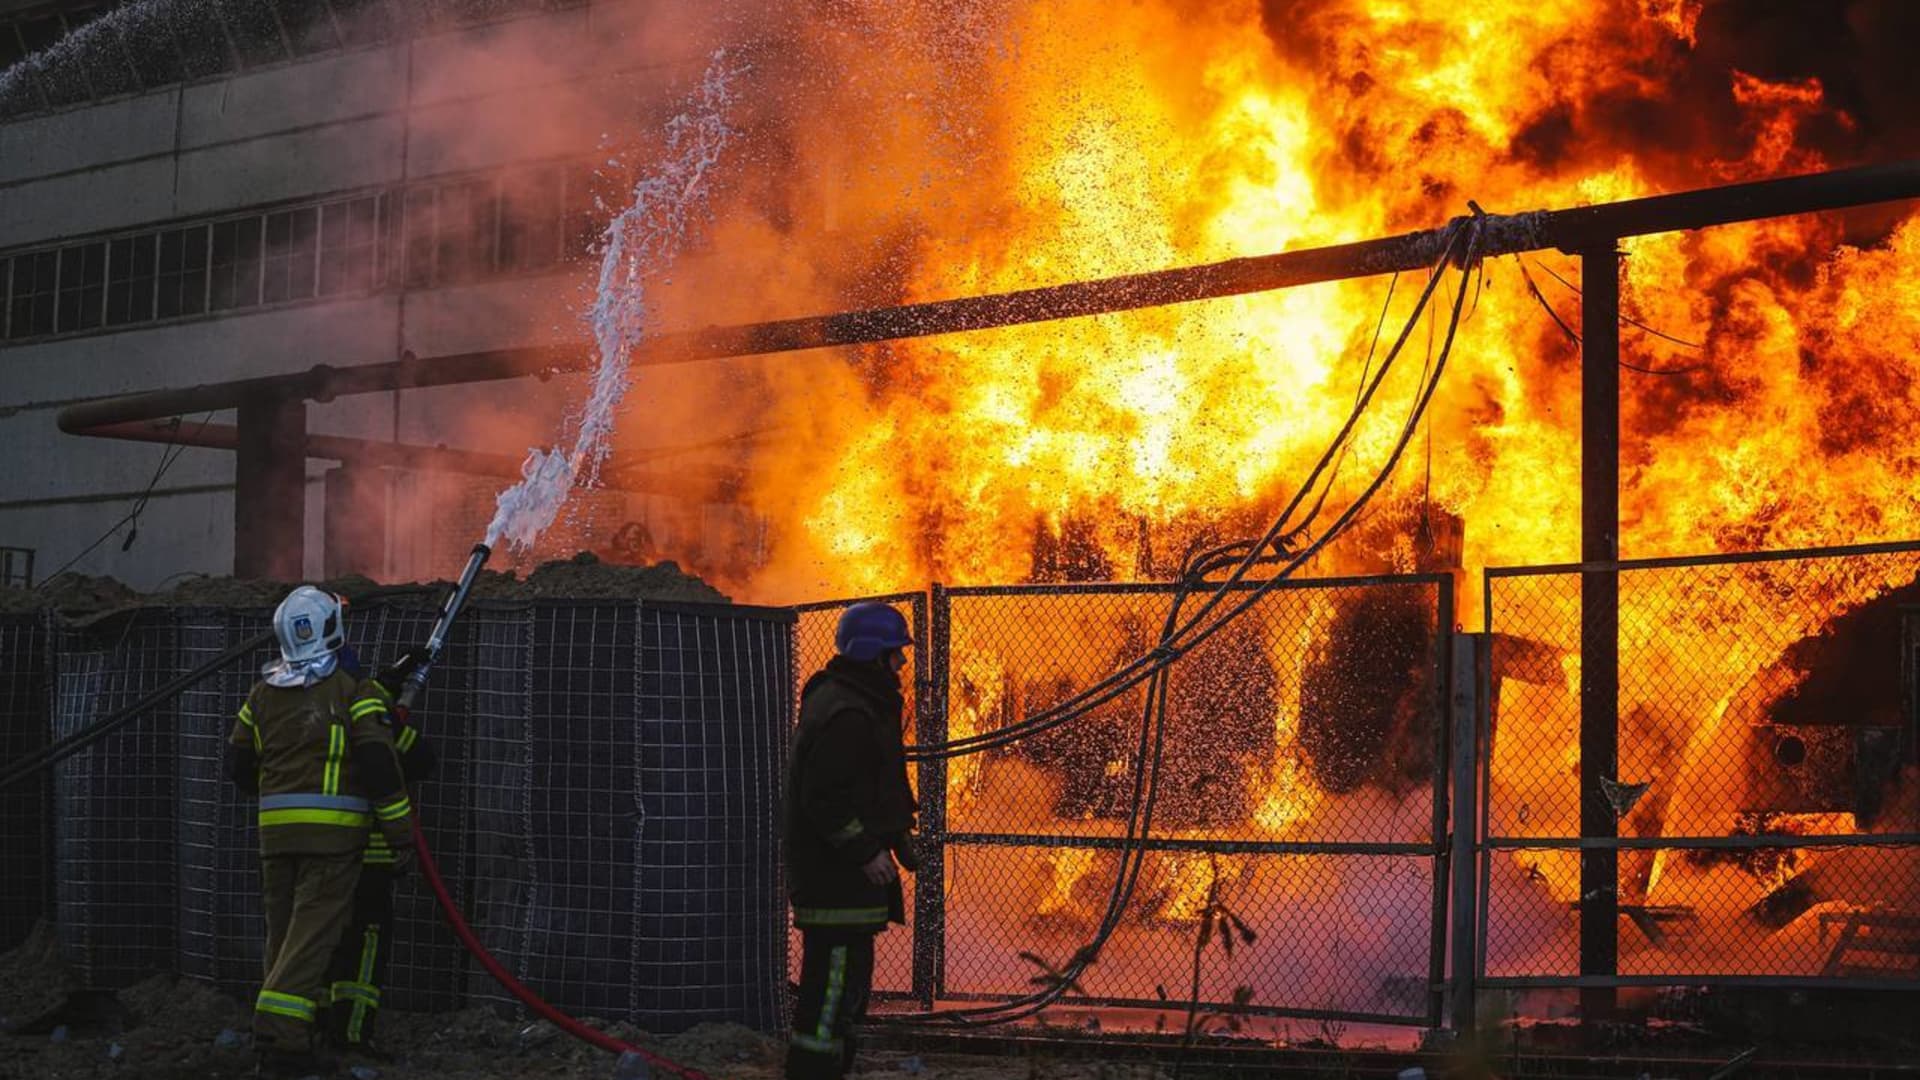 Members of emergency services respond to a fire after a Russian attack targeted energy infrastructure in Kyiv, Ukraine on Oct. 18, 2022.